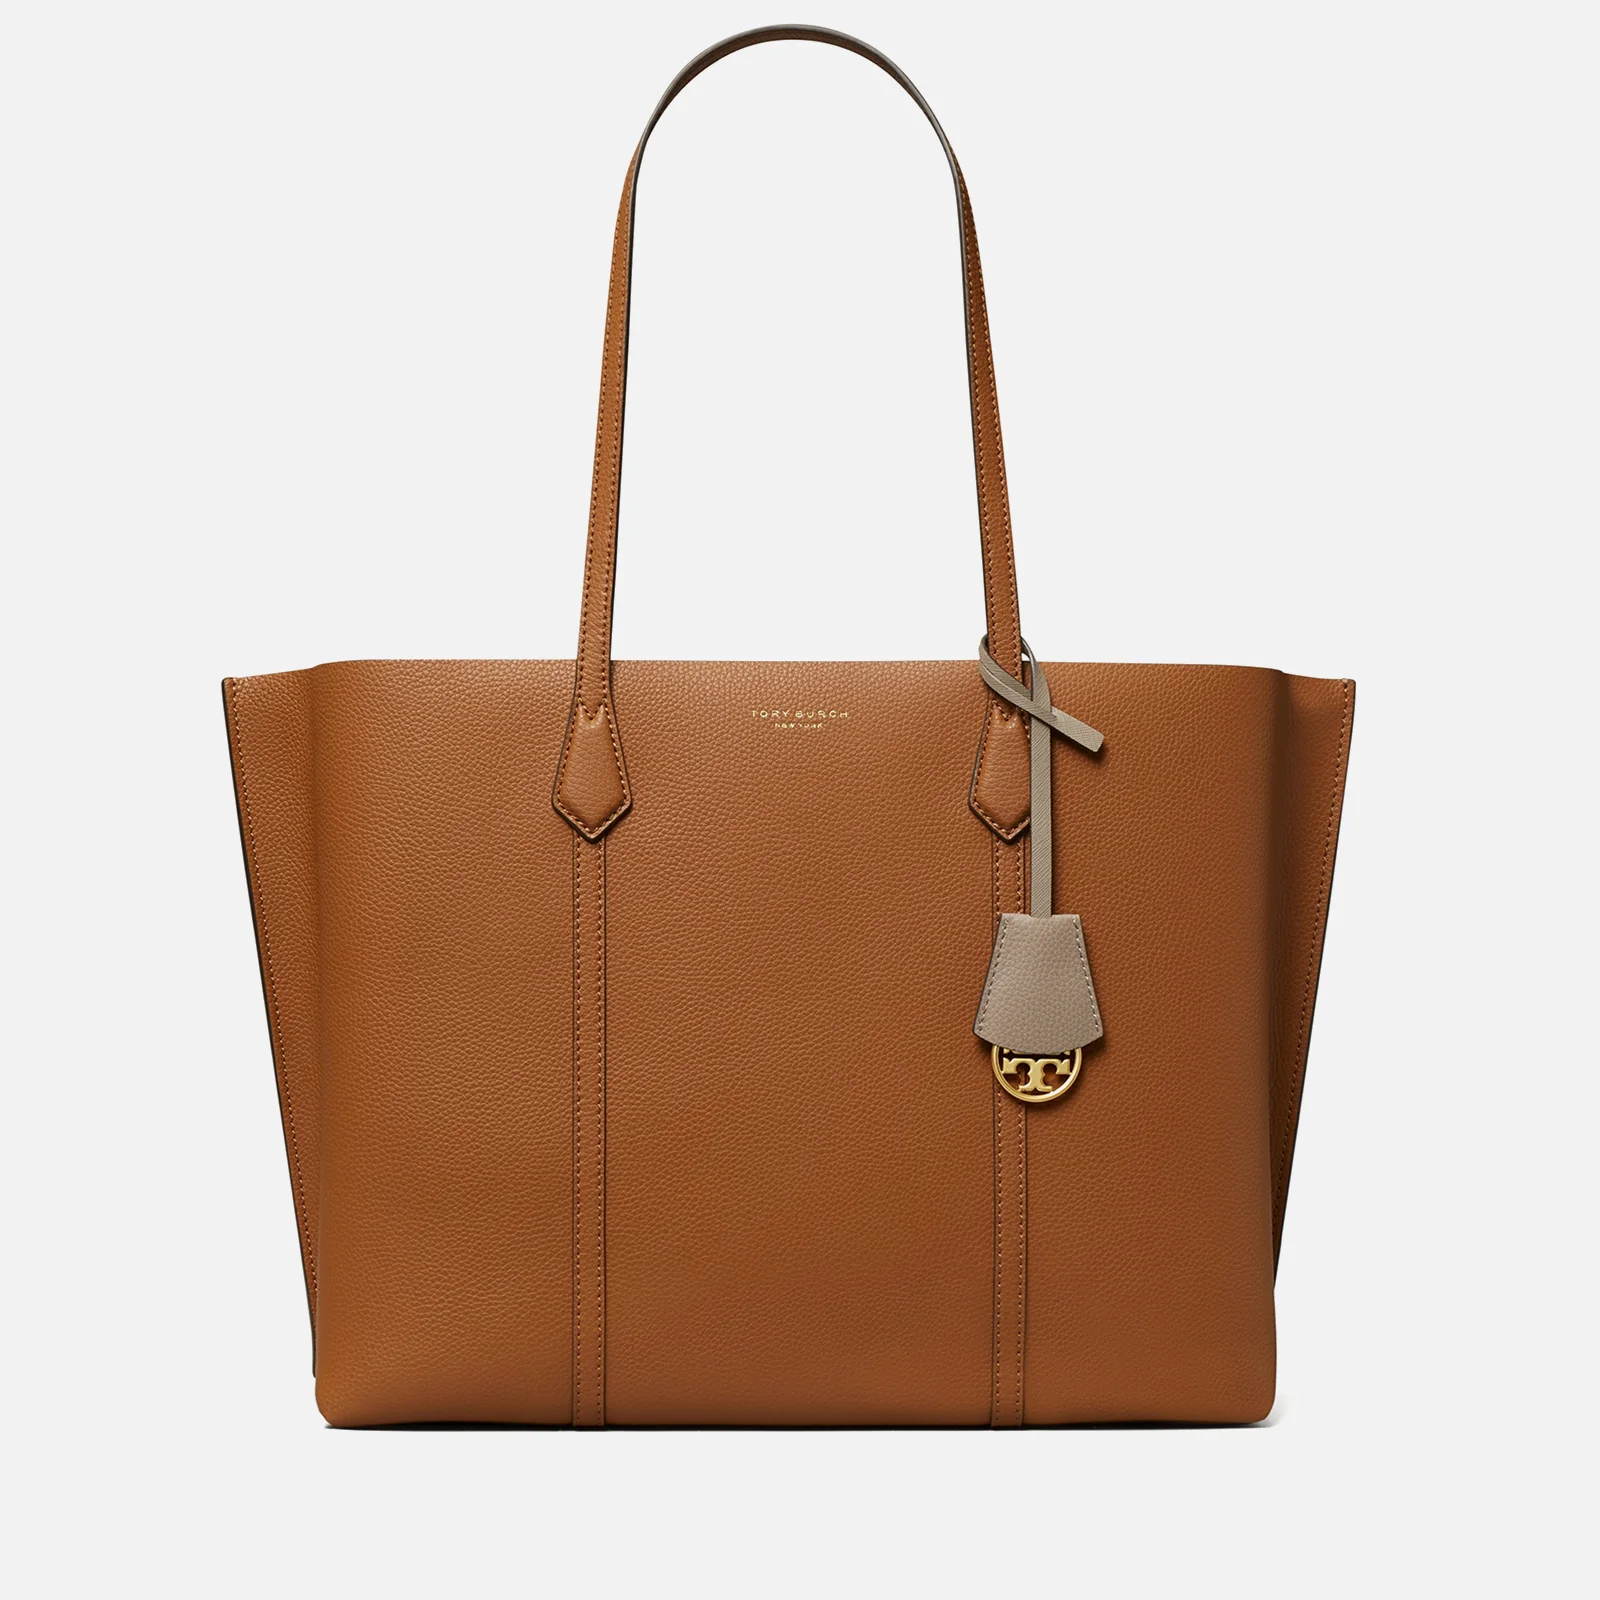 Tory Burch Women's Perry Triple Compartment Tote Bag - Light Umber Image 1